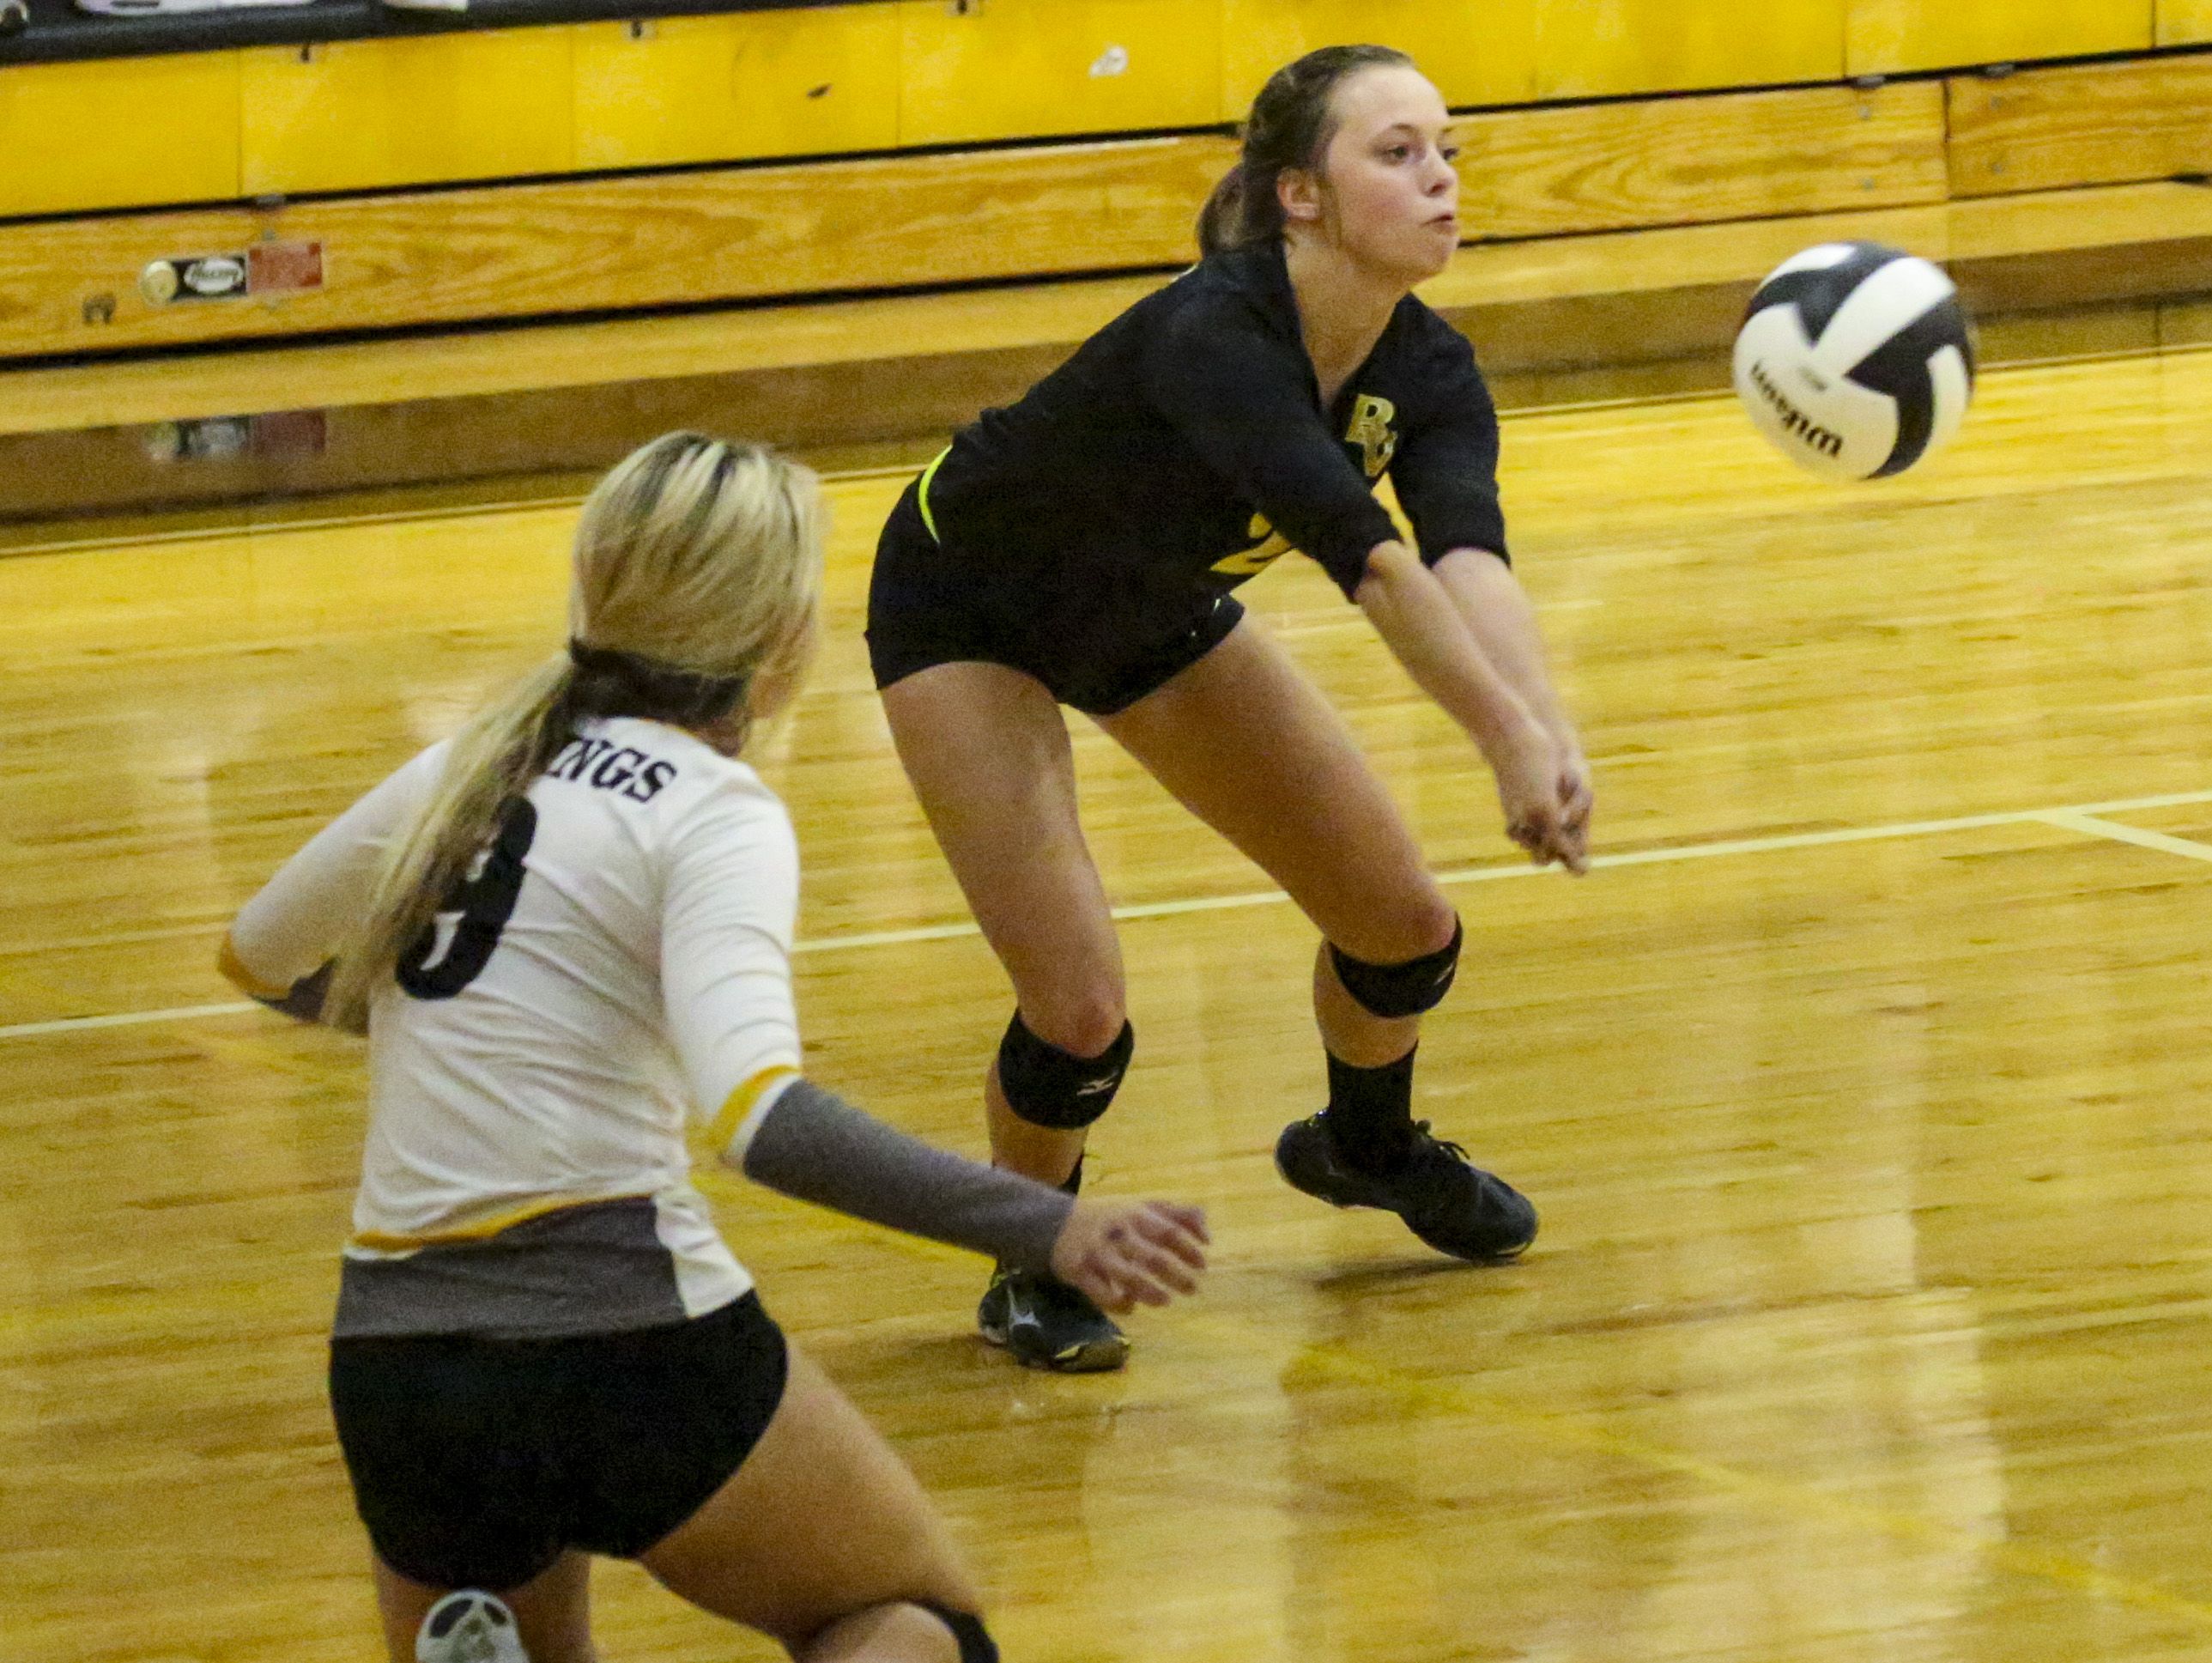 Senior libero Kelsey Sullivan and the Bishop Verot volleyball team face Westminster Christian in a Class 4A semifinal on Saturday in Miami.